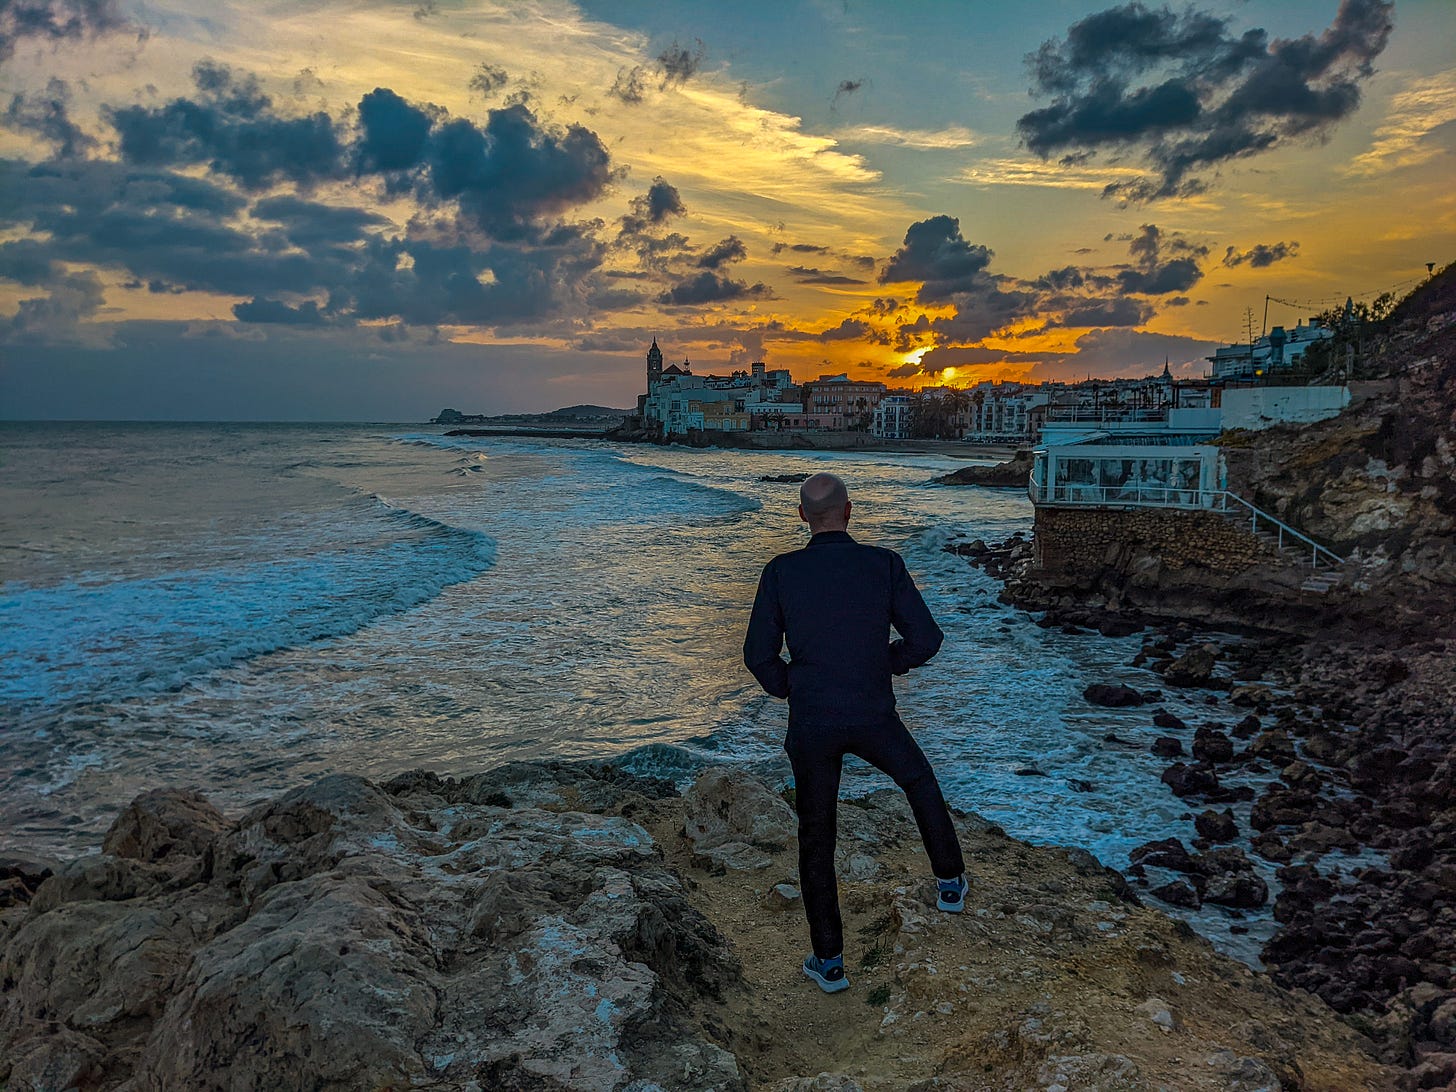 Brent standing on a rock overlooking the rocky coast up toward Sitges with a golden sunset providing the perfect backdrop.